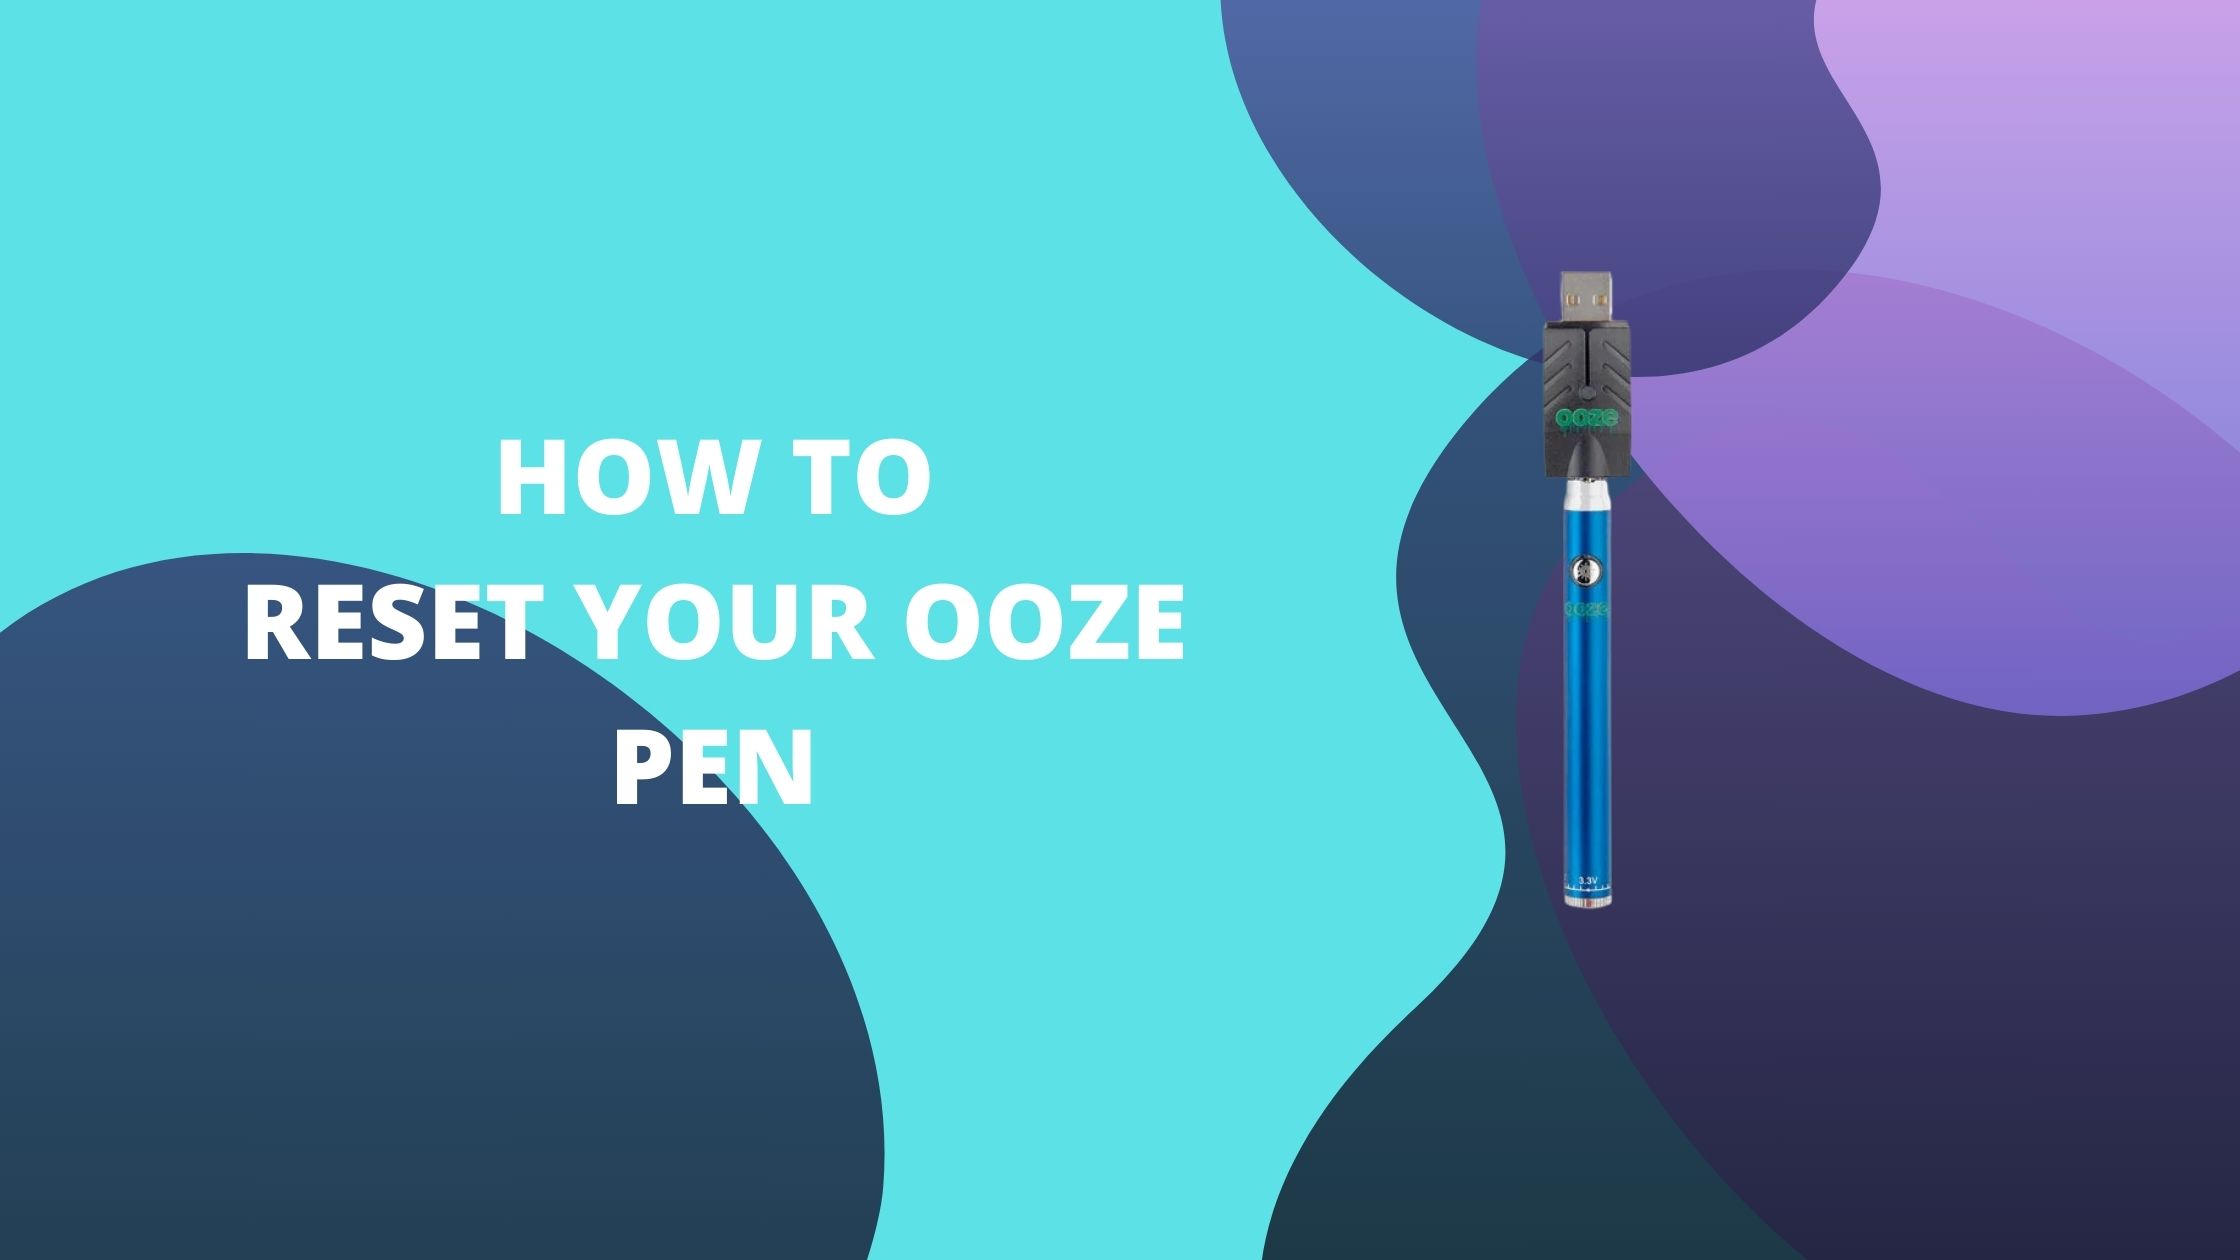 Troubleshooting your ooze pen if it is not working.